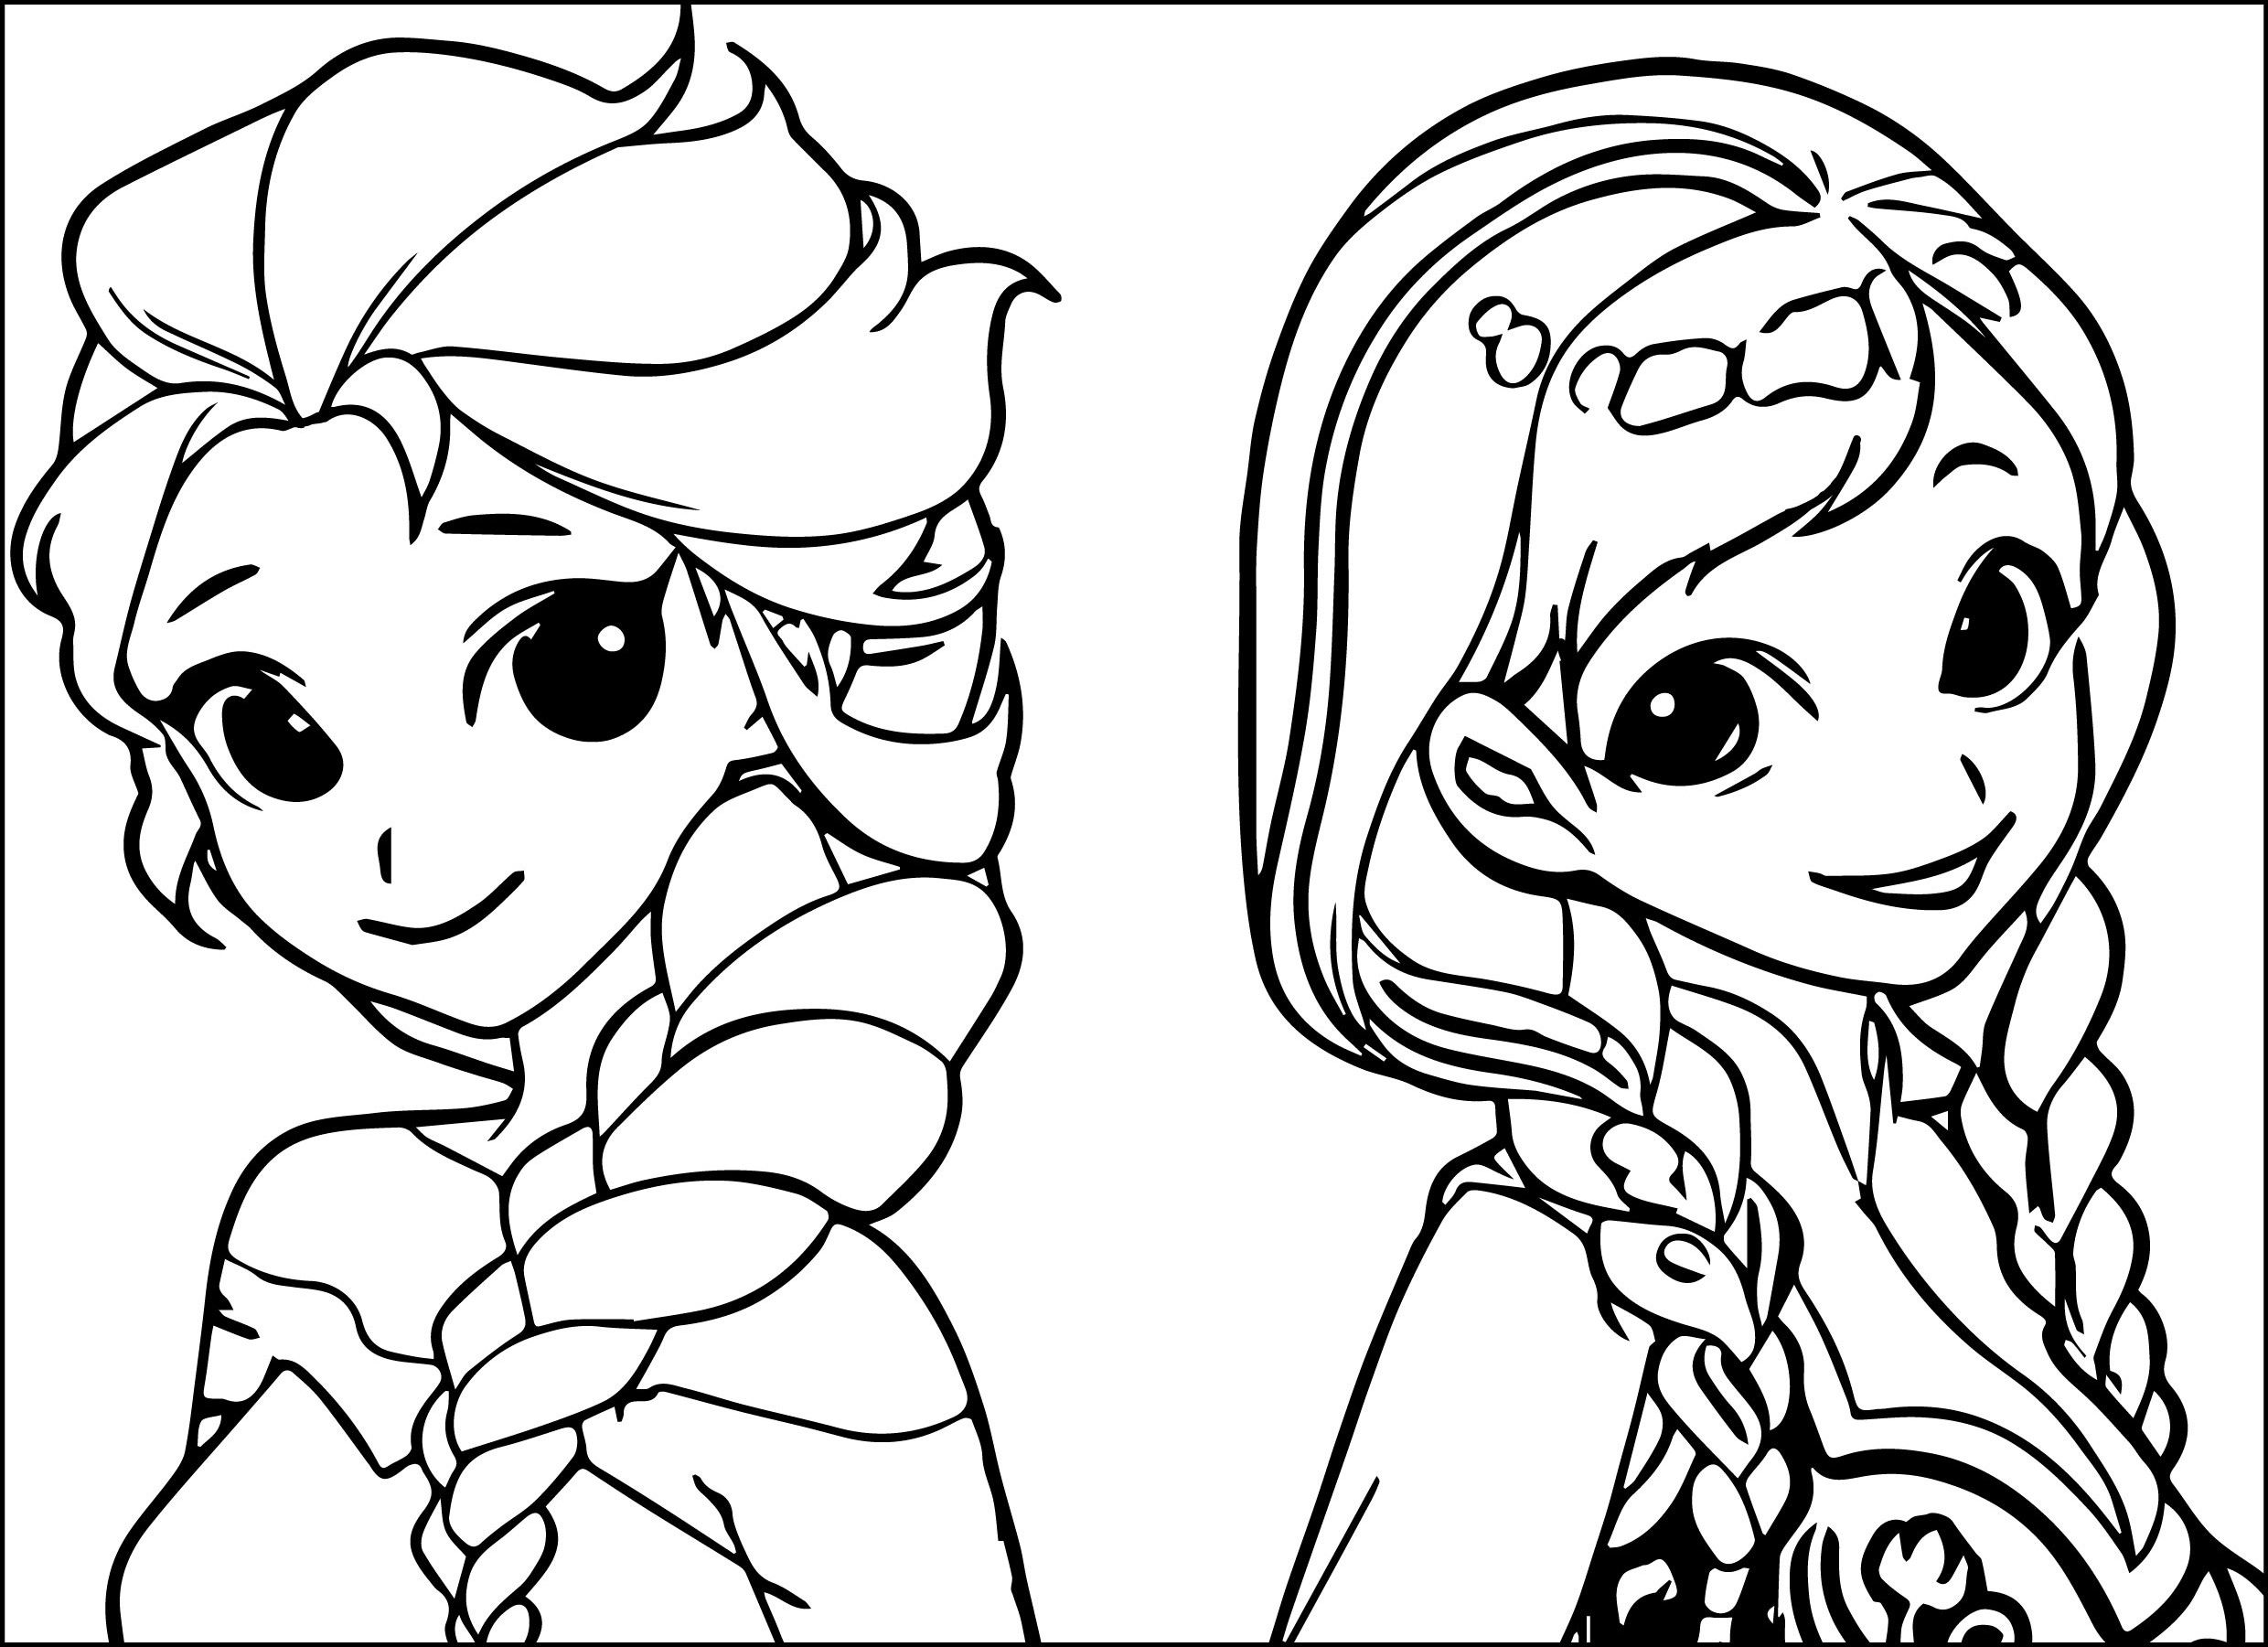 Elsa Anna Coloring Pages at GetColorings.com | Free printable colorings